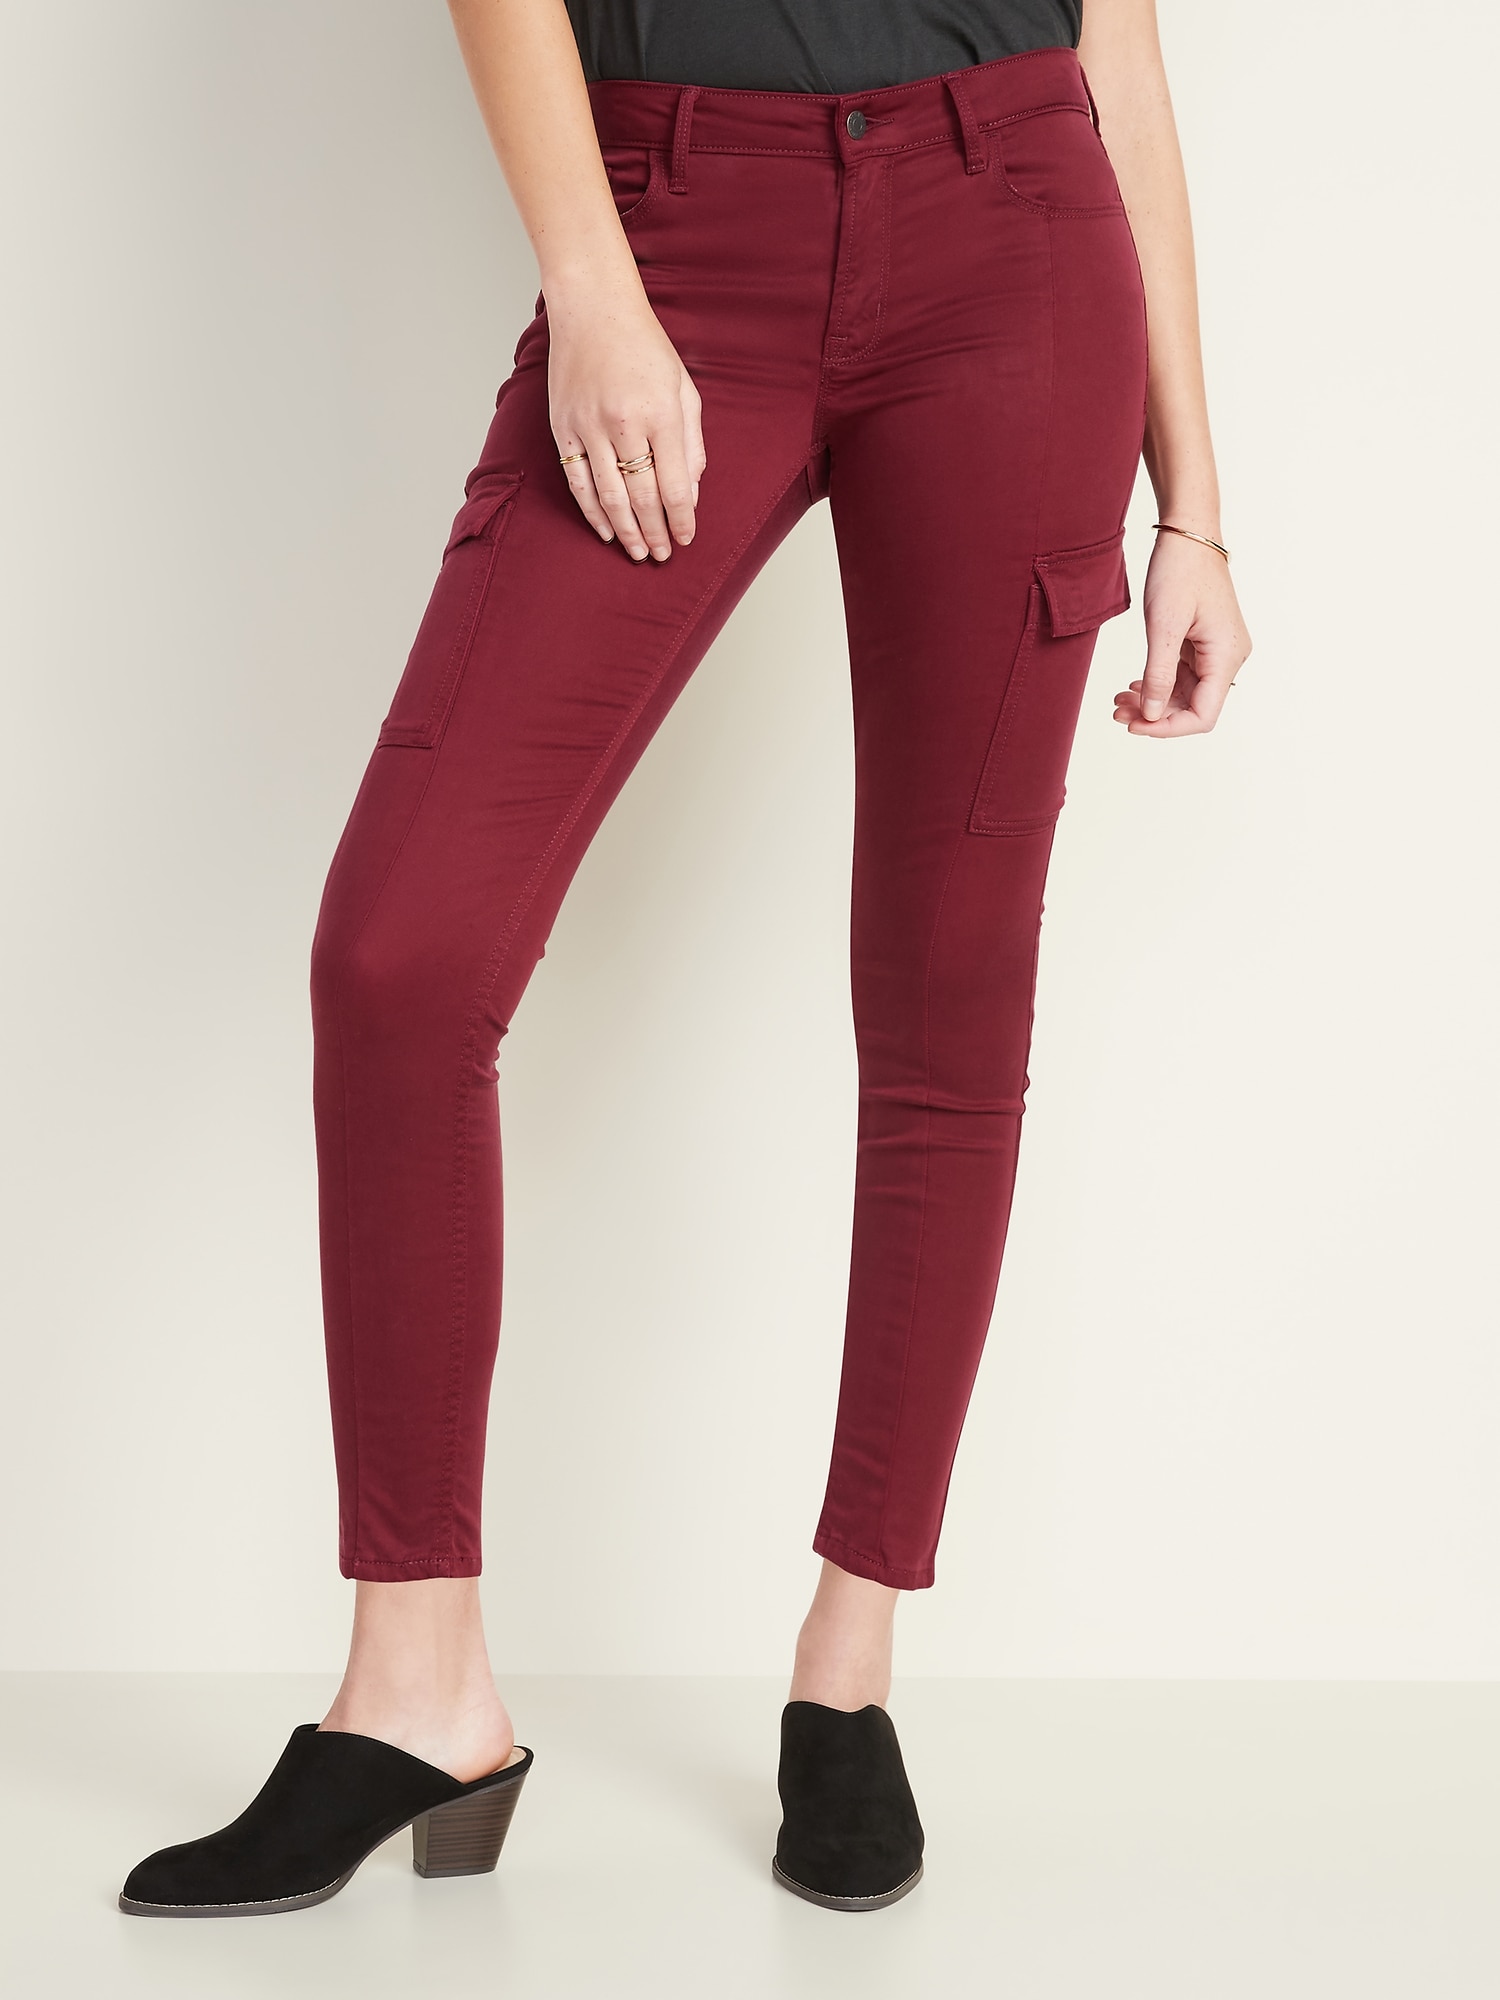 Old Navy High-Waisted Rockstar Super Skinny Sateen Jeans for Women